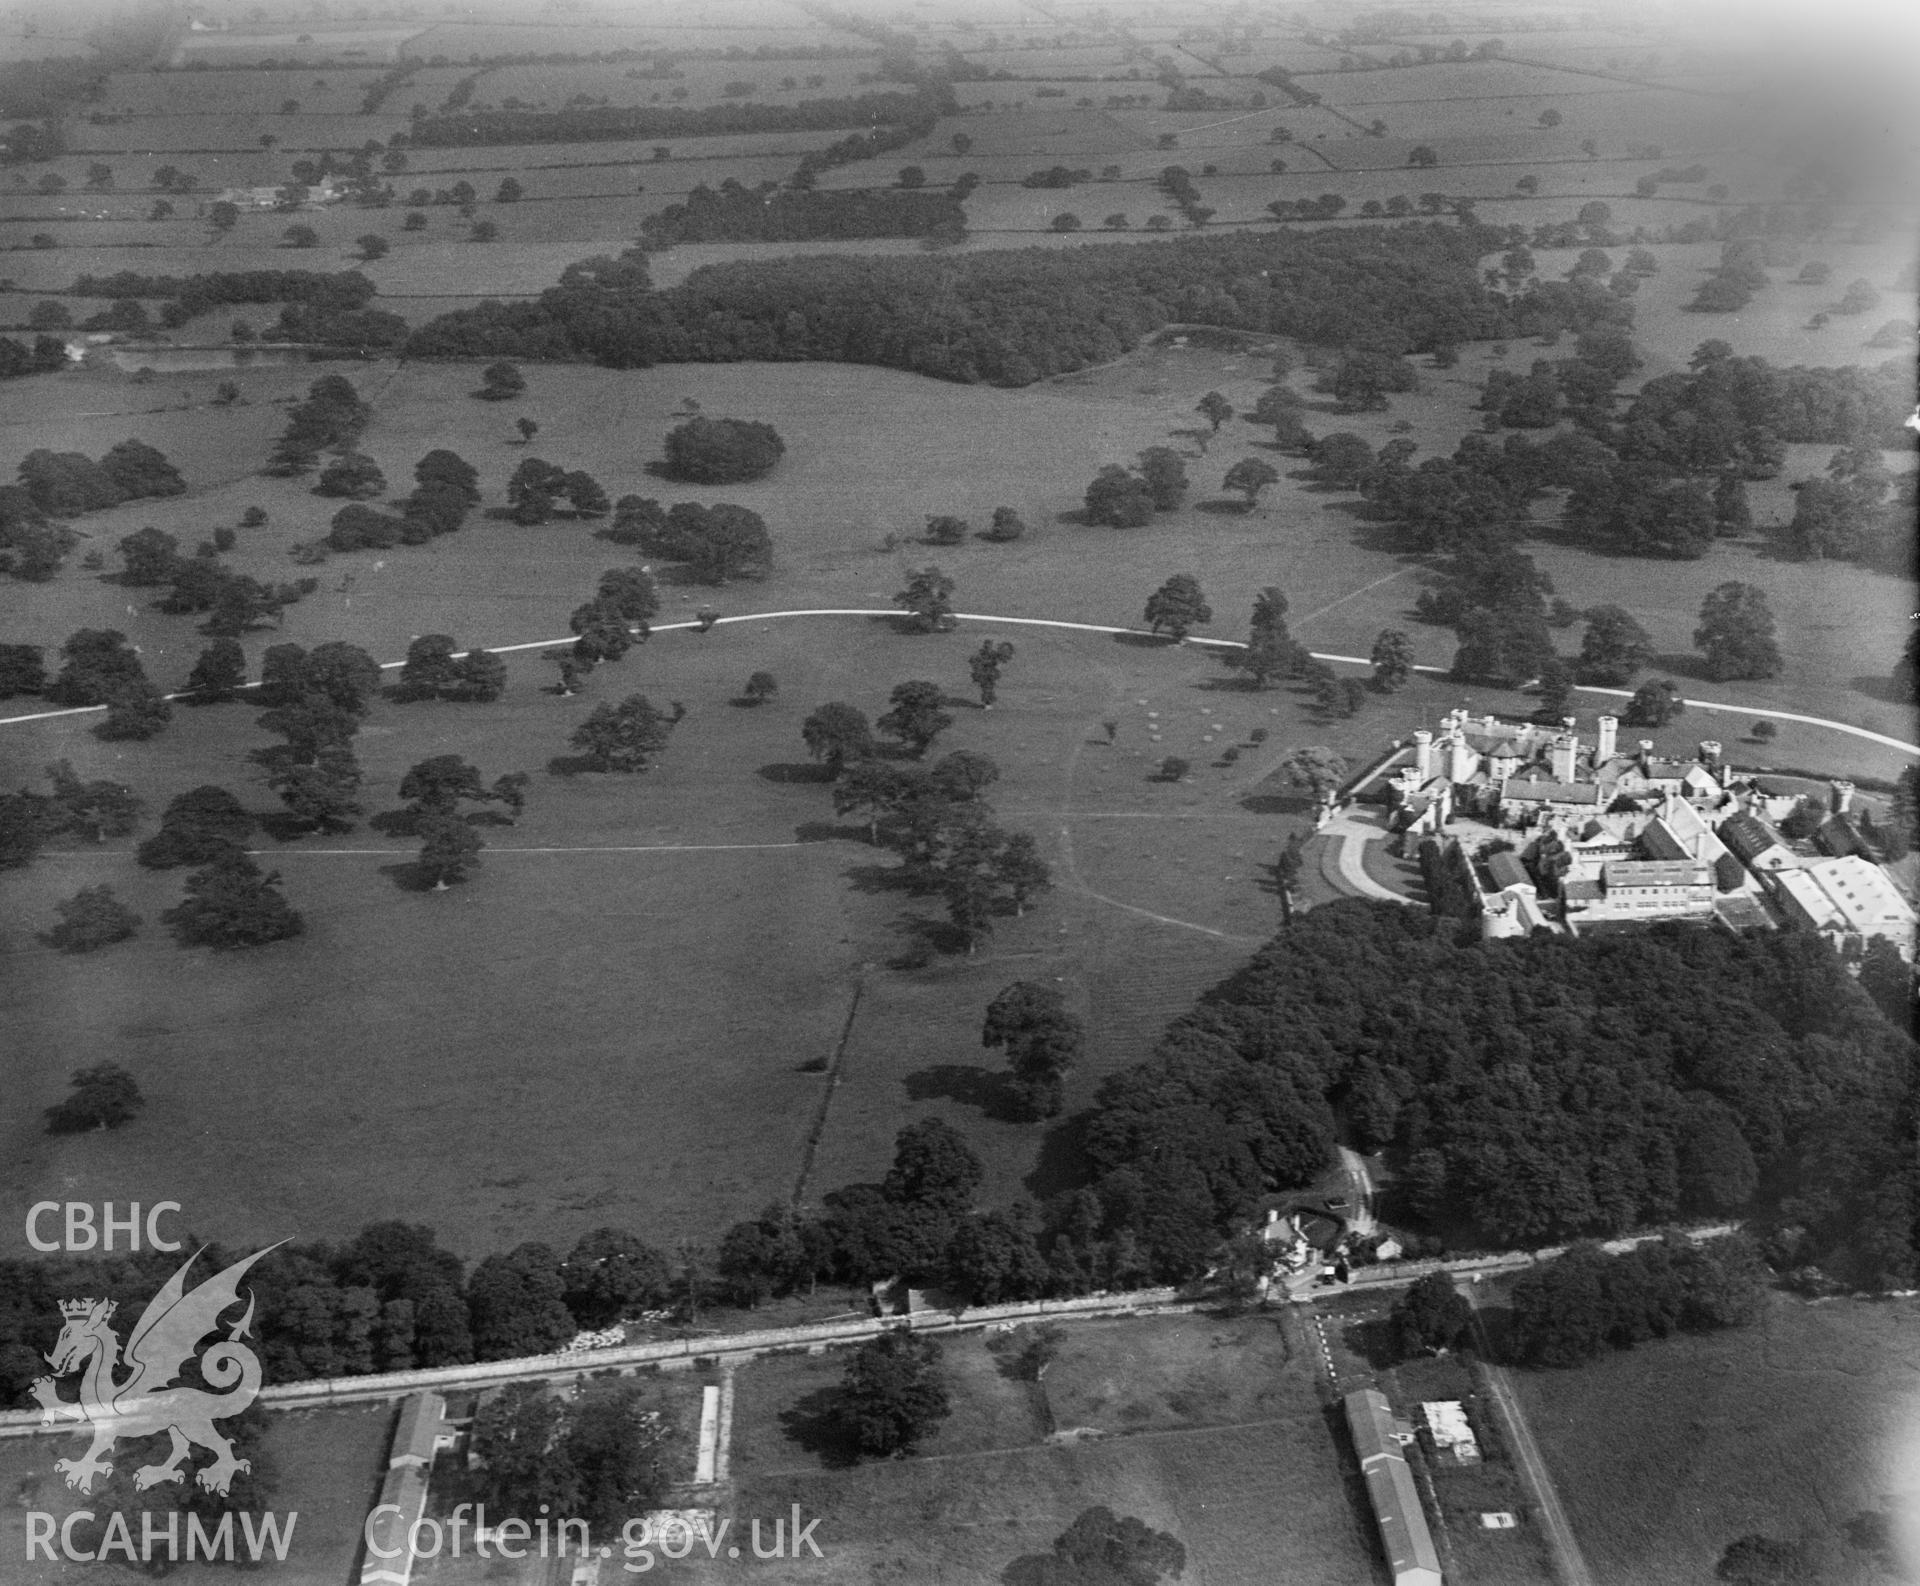 View of Bodelwyddan Castle showing Kimnel military camp in the foreground.